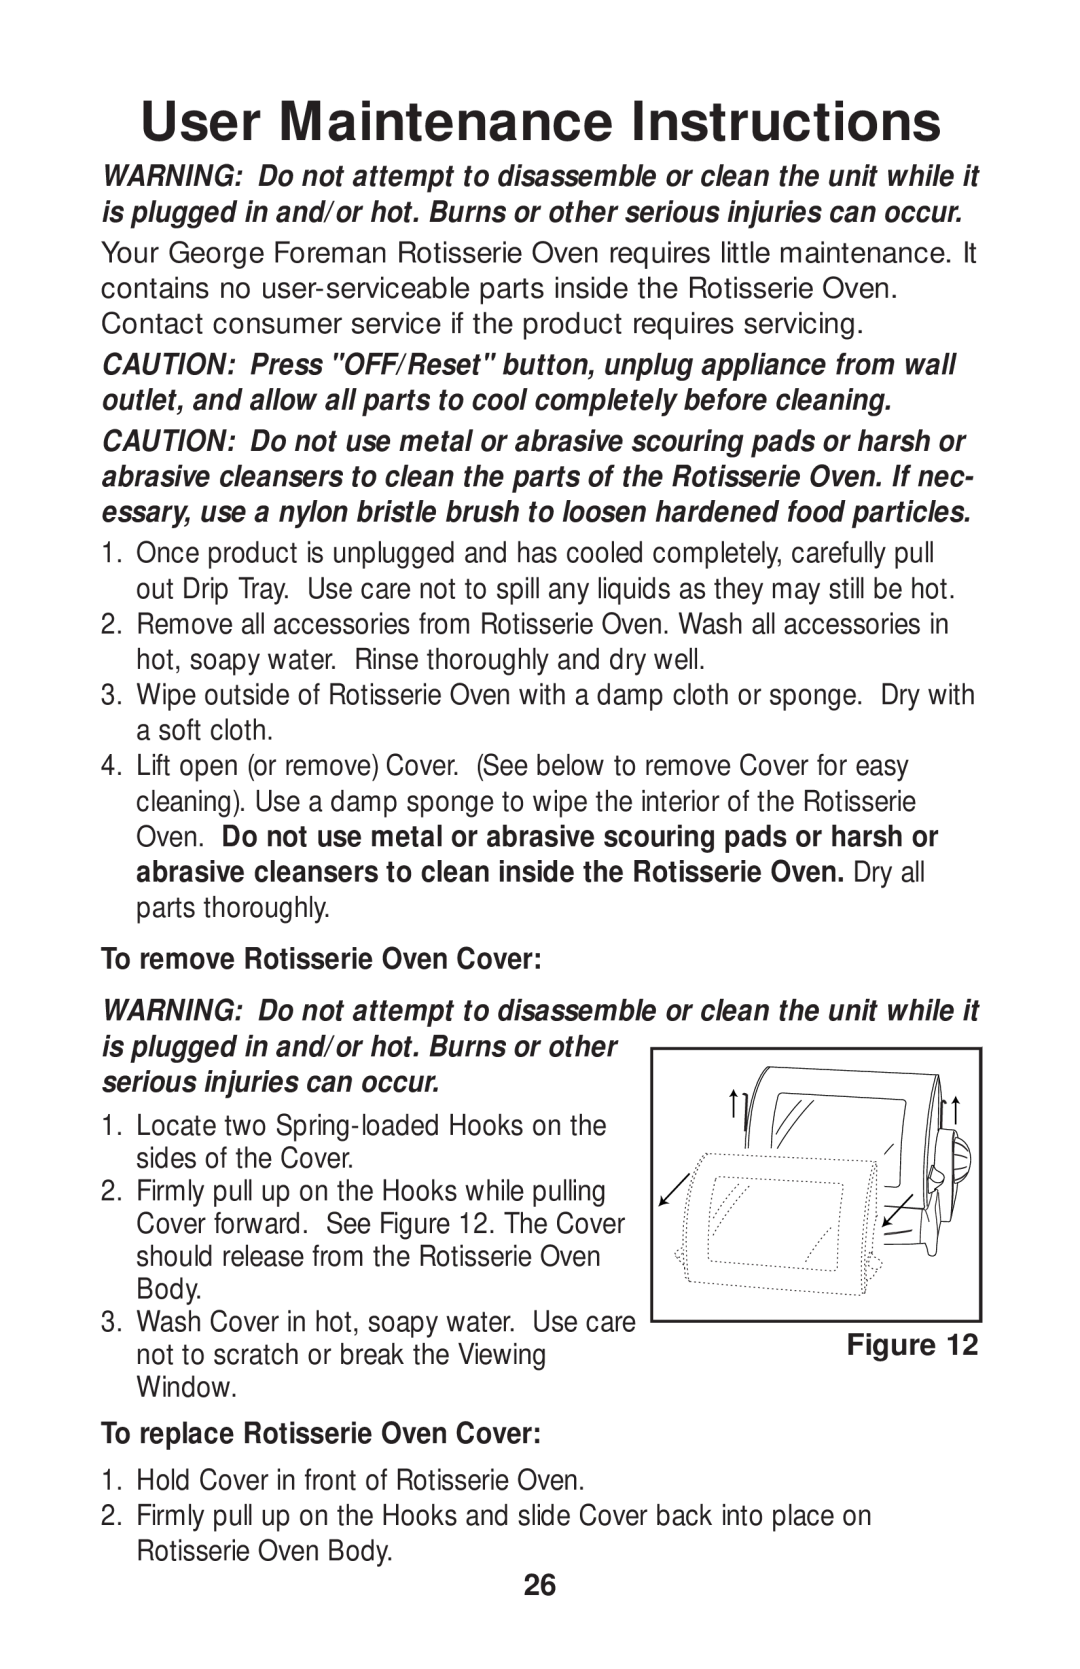 Salton GR80B owner manual User Maintenance Instructions, To remove Rotisserie Oven Cover, serious injuries can occur 